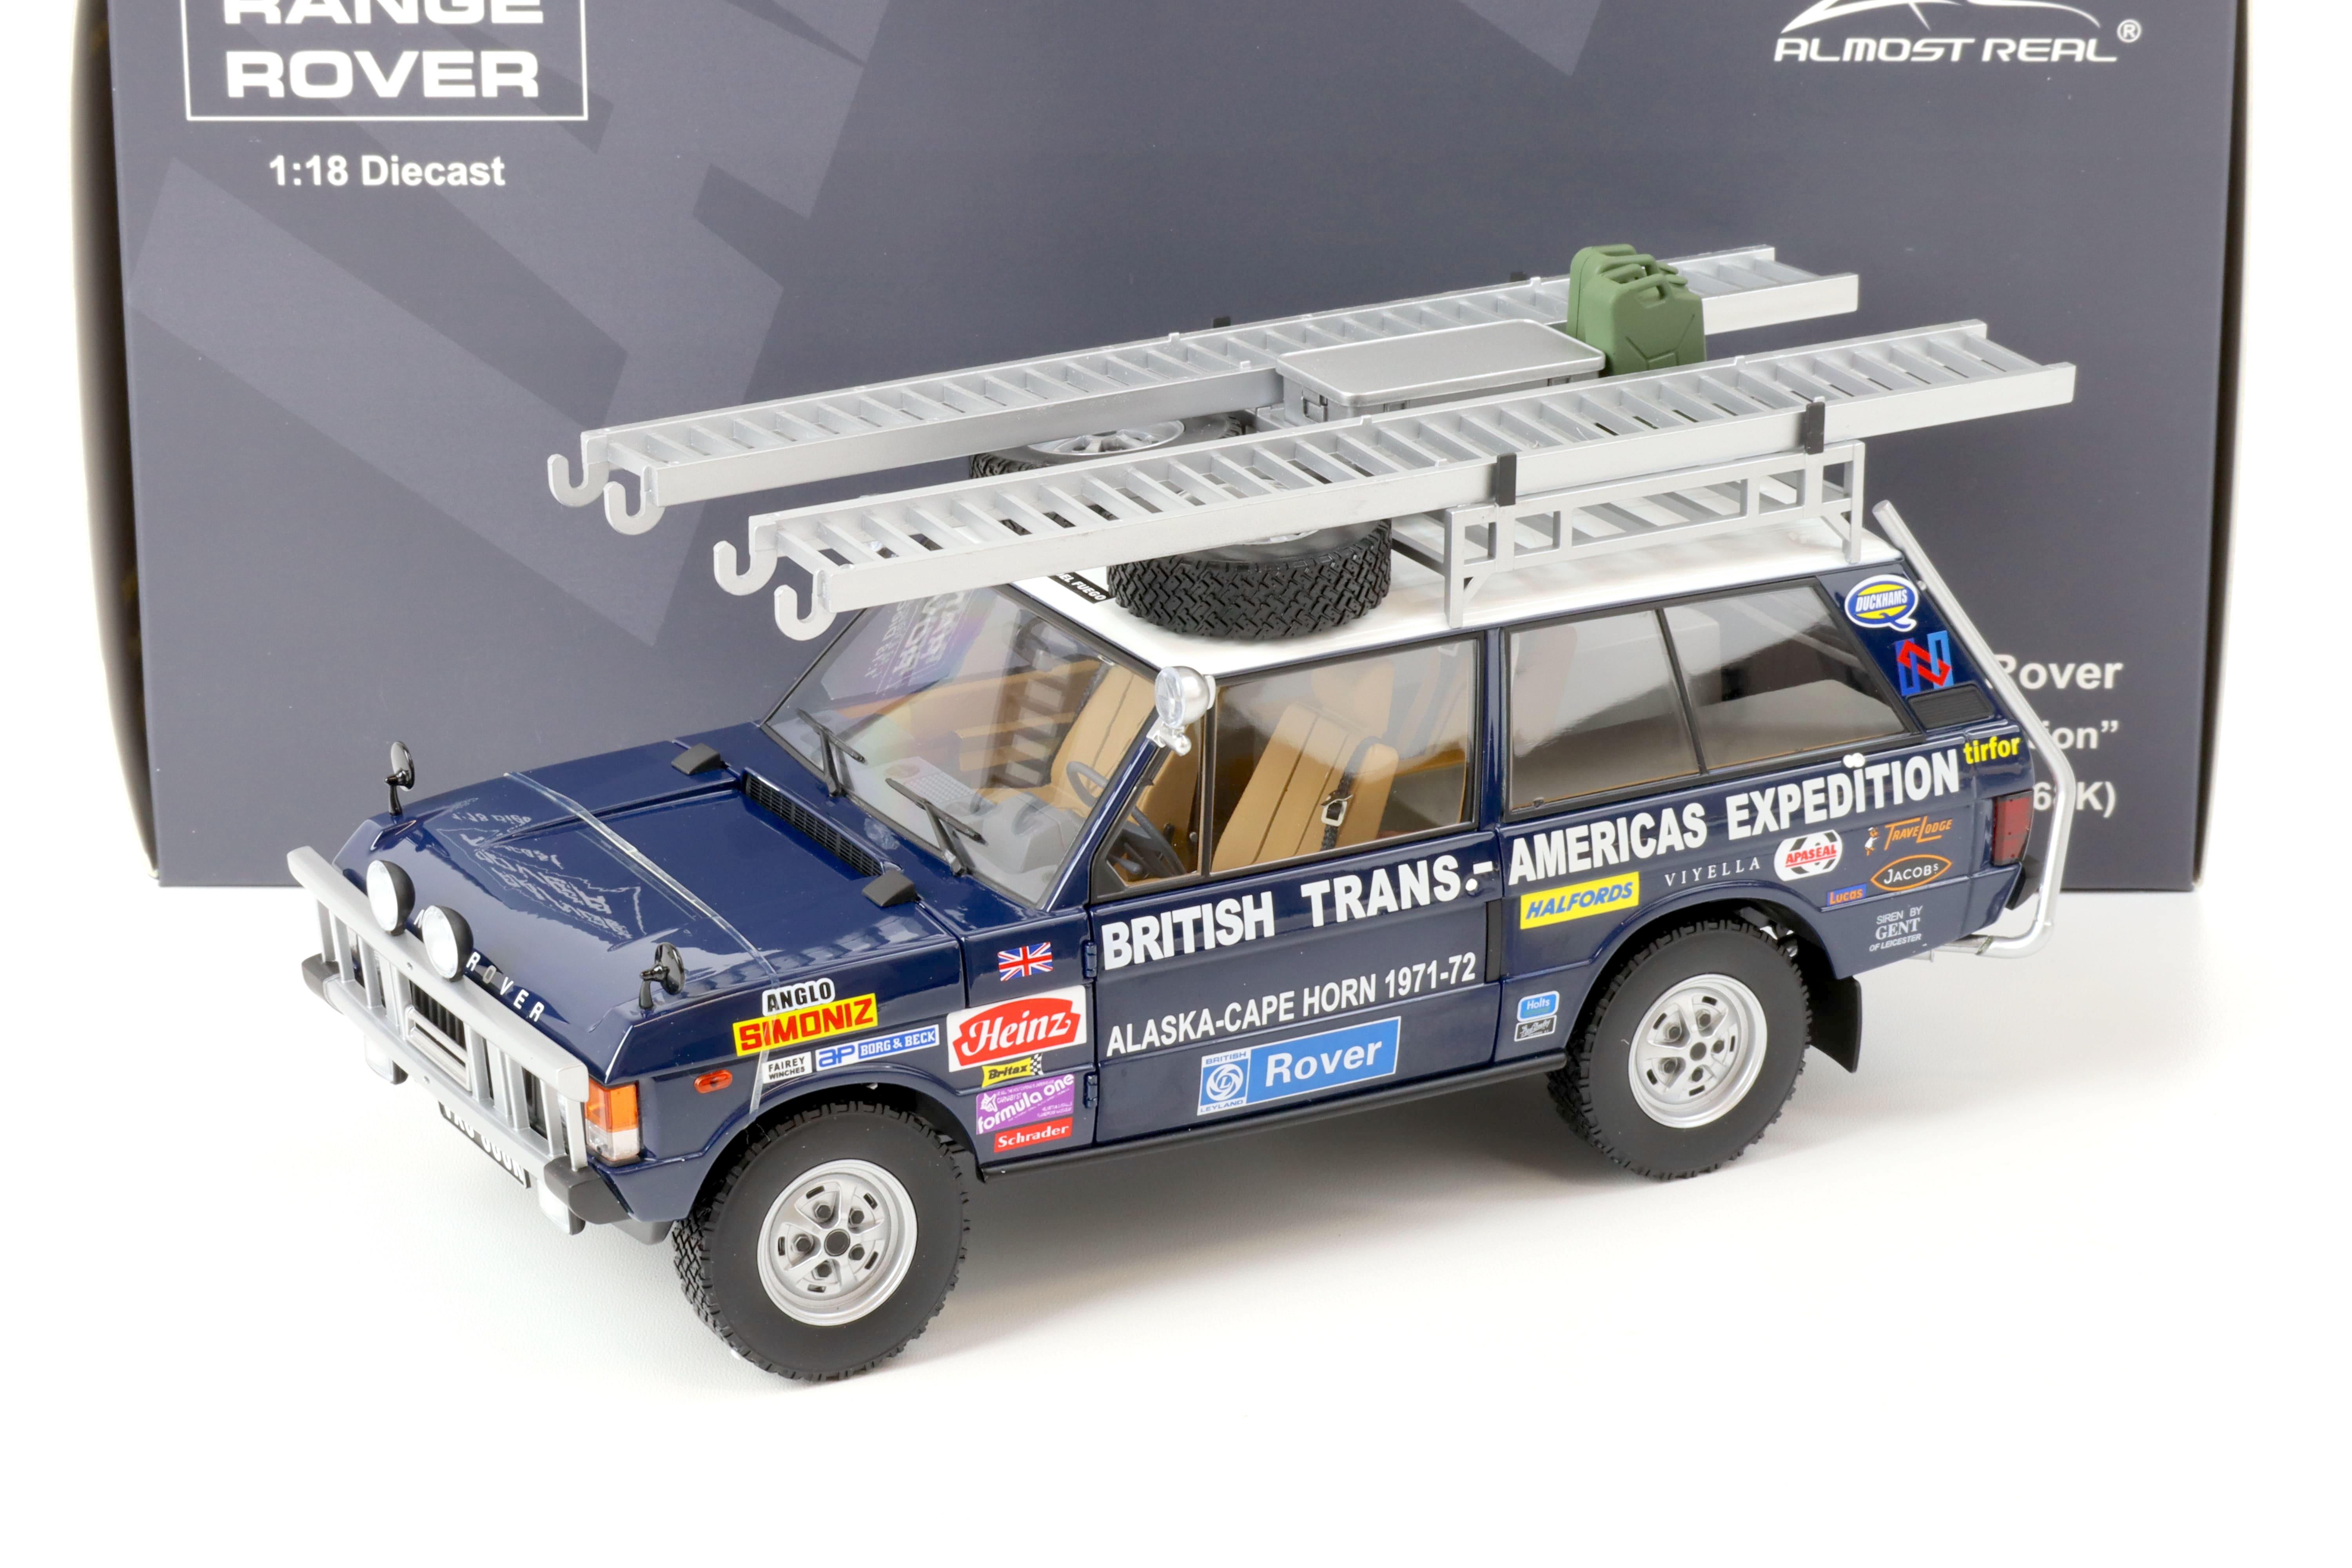 1:18 Almost Real Land Rover Range Rover Trans-Americans Expedition 868K 1971-72